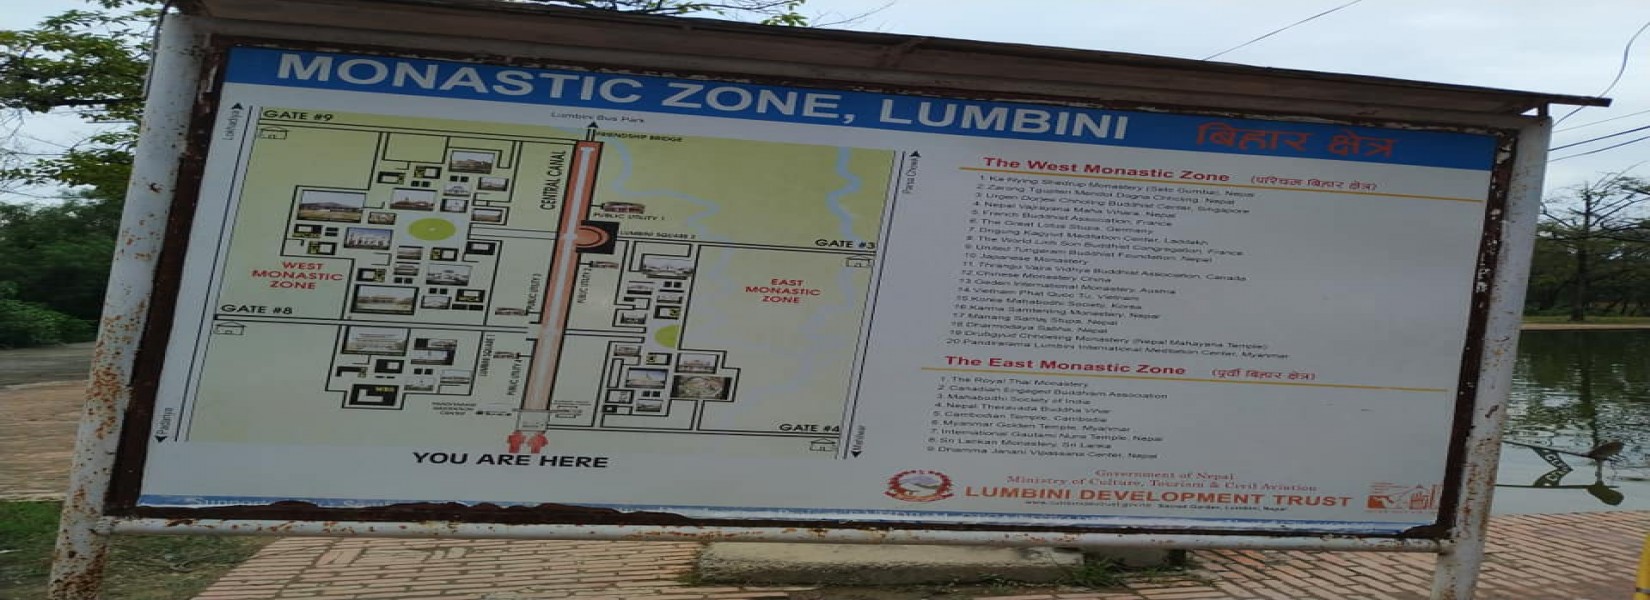 Monastic Zone in Lumbini : Different Monasteries in a Place